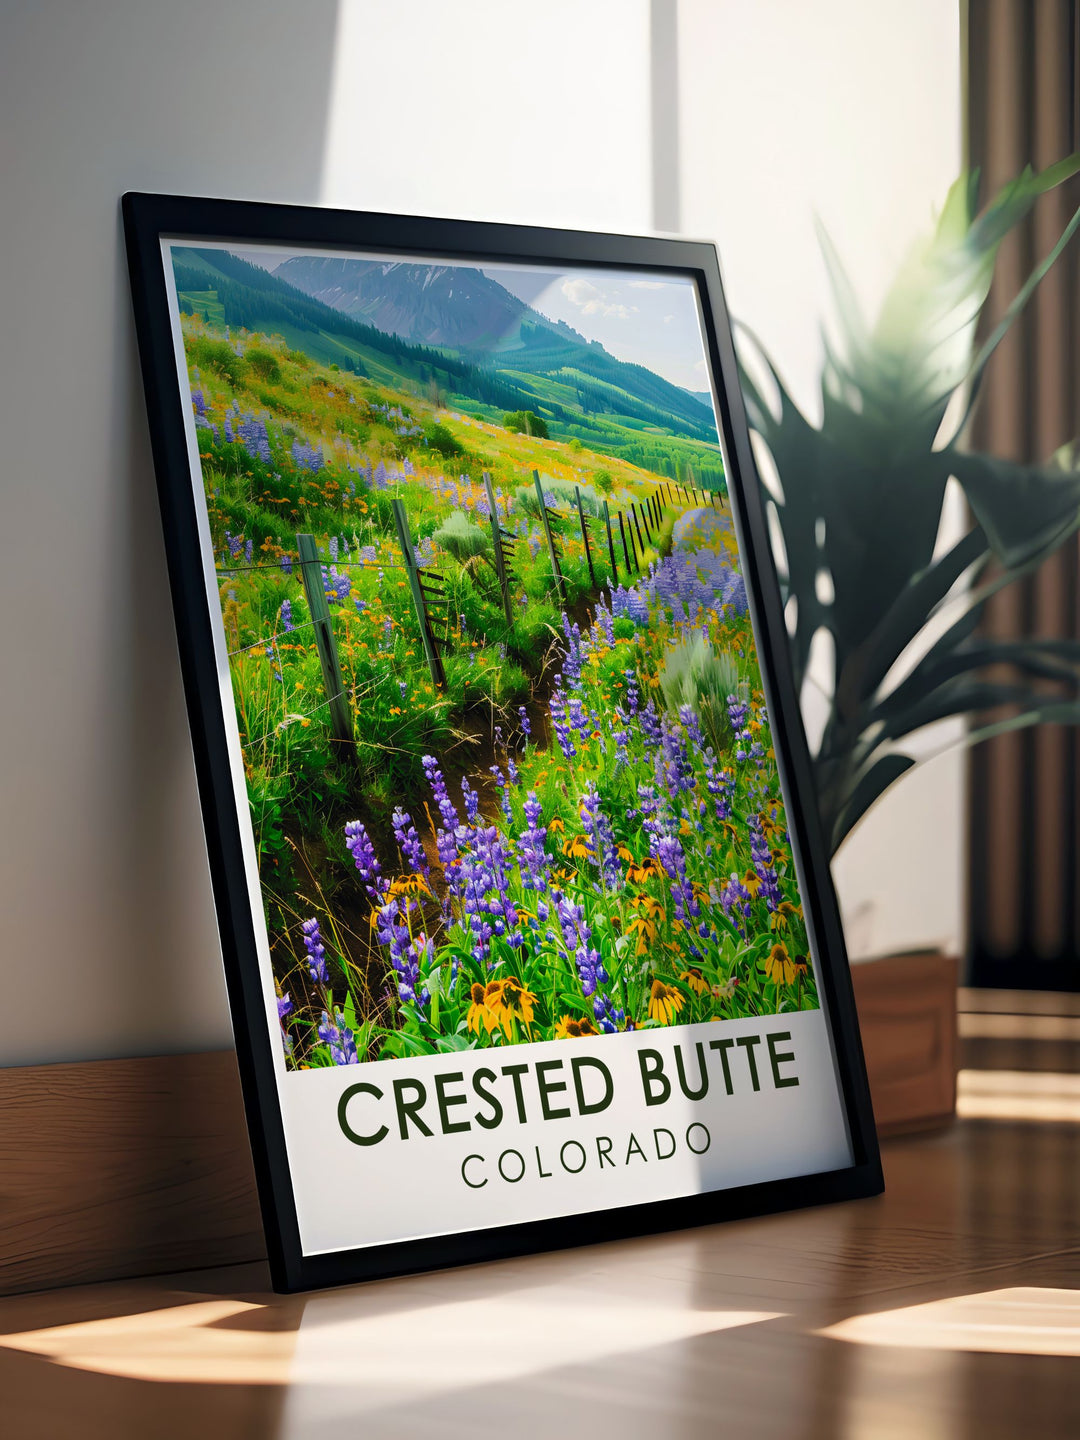 Bring the beauty of Colorado into your home with this Wildflower Festival travel poster from Crested Butte showcasing the vibrant wildflowers and picturesque landscapes of the Rocky Mountains perfect for any room.